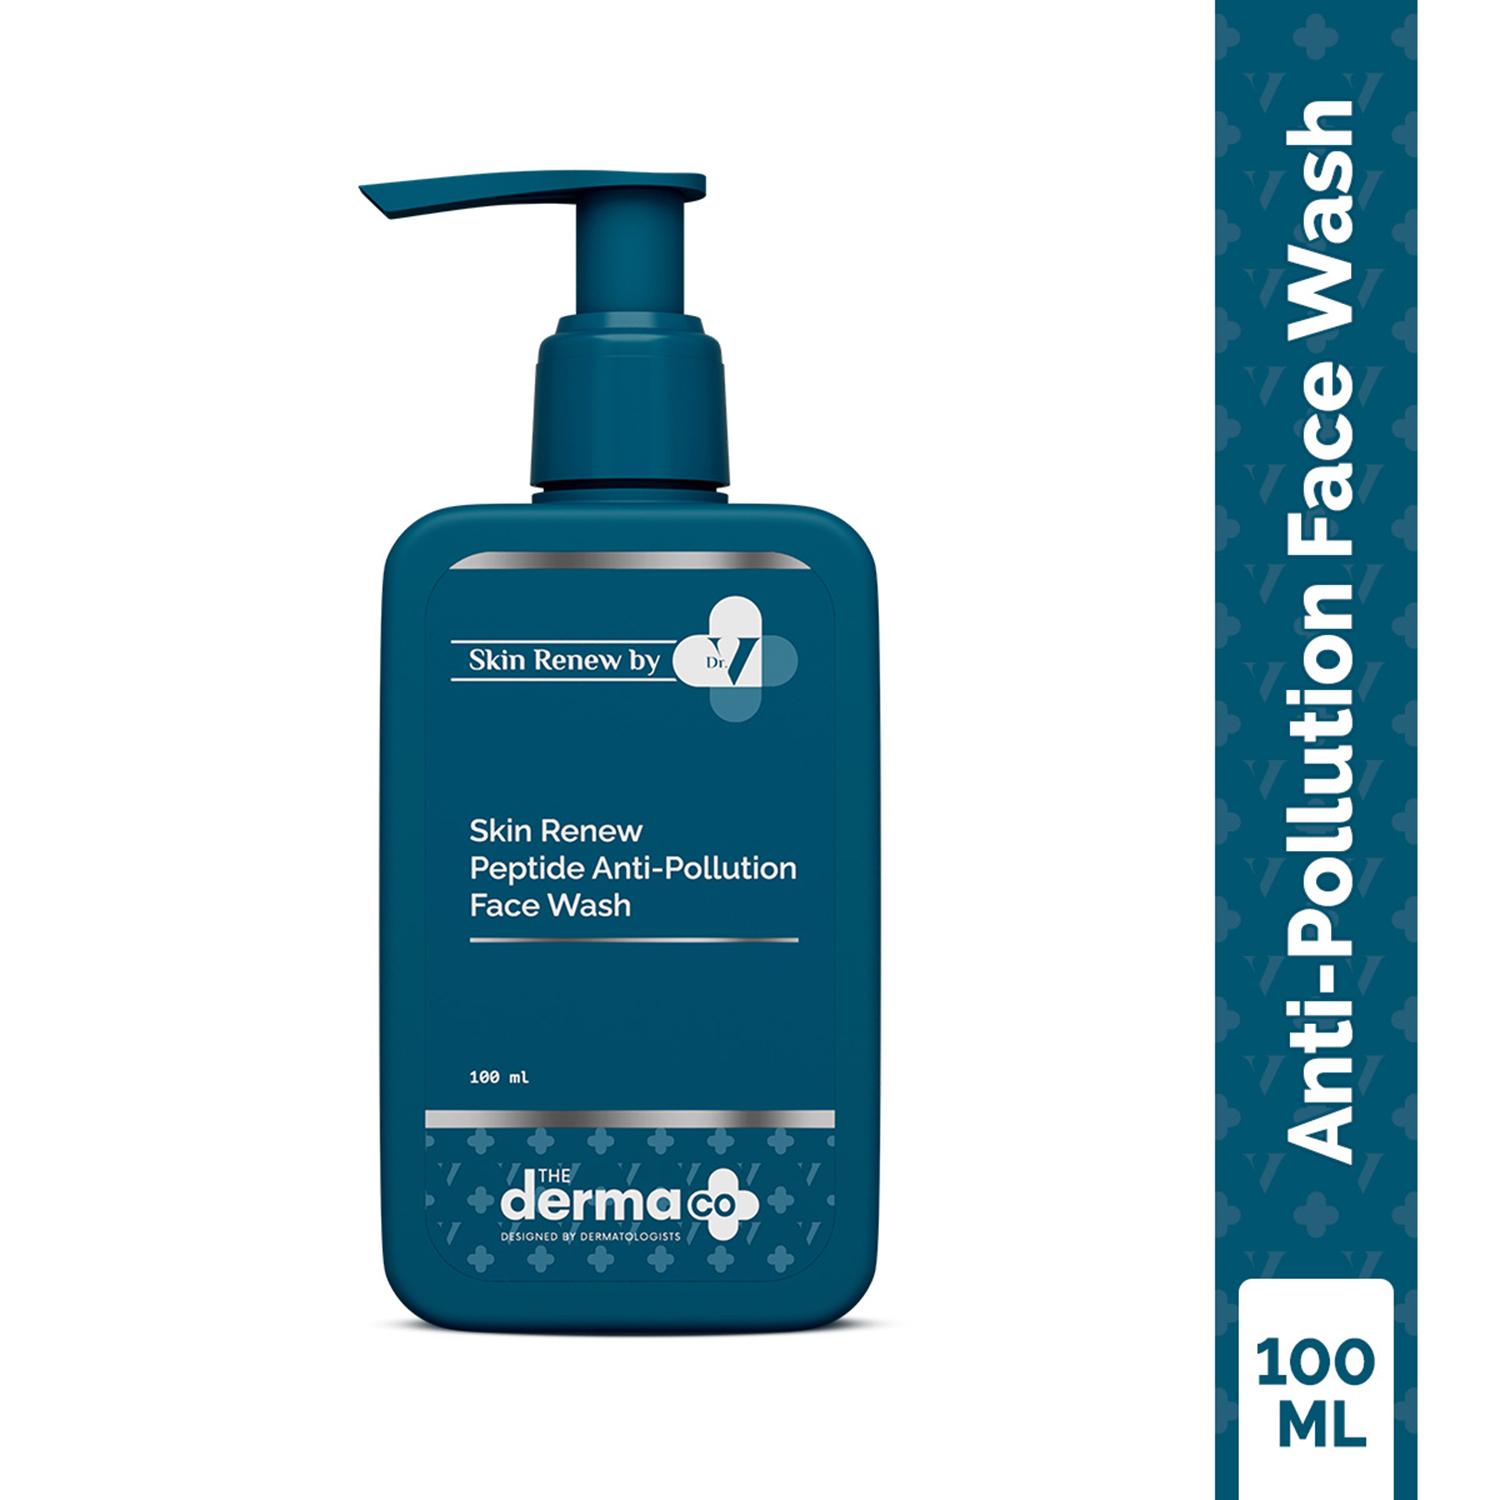 The Derma Co | The Derma co Skin Renew Peptide Anti-Pollution Face wash with Peptides & Niacinamide - (100 ml)